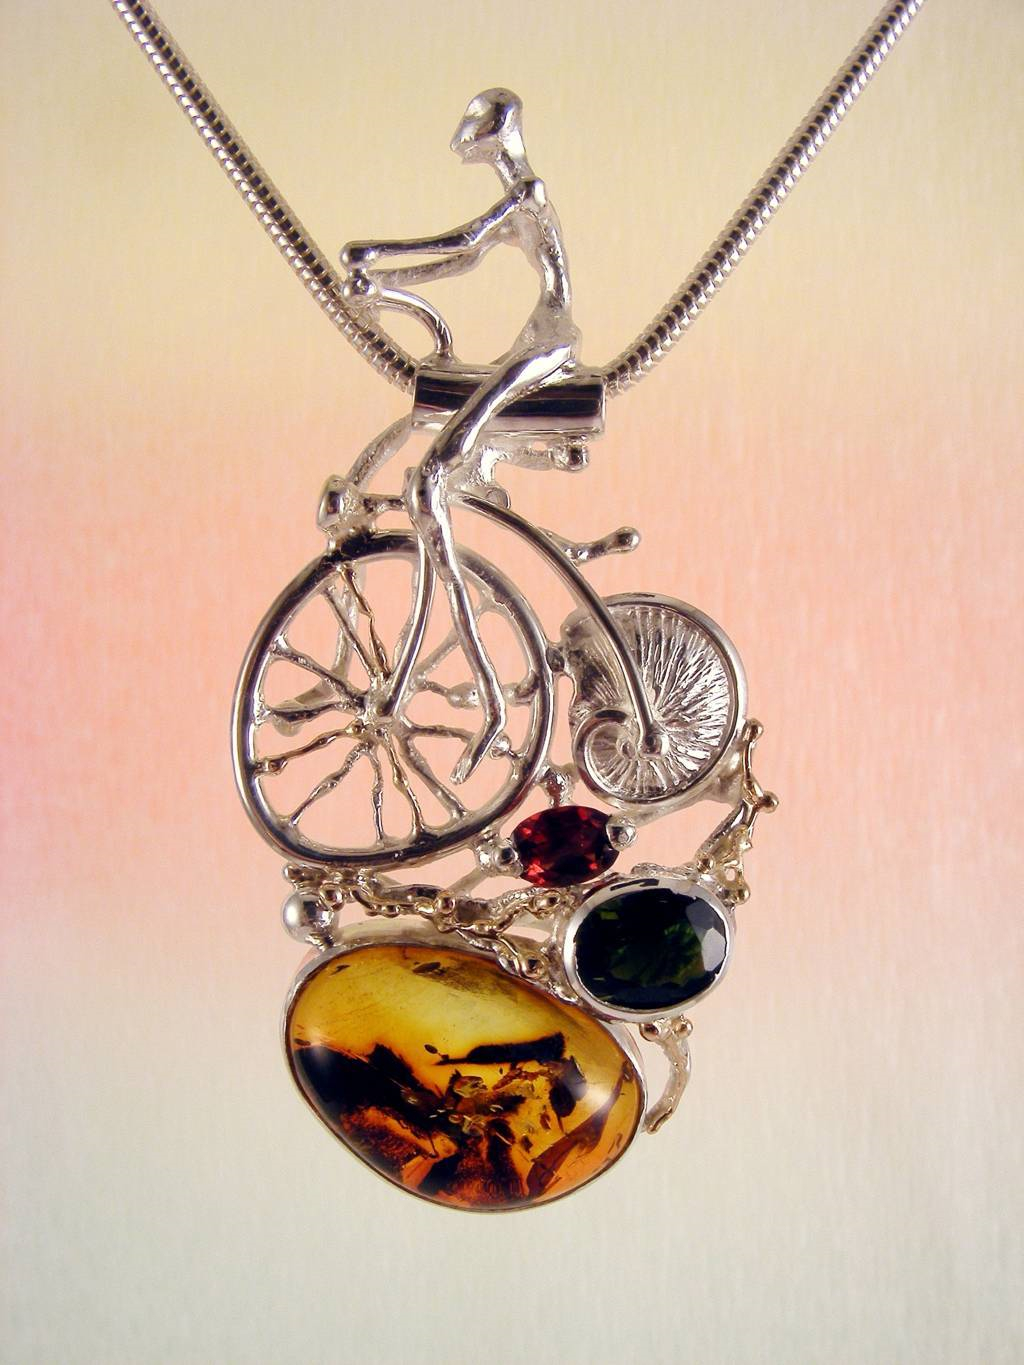 gregory pyra piro sculptural pendant 4287, artists during lockdown making handcrafted jewellery, makers during lockdown who make handcrafted jewellery, galleries during lockdown with handcrafted jewellery, historical high wheel bicycle sculptural pendant, pendant with bicycle that has shell wheel, penedant with facted gemstones and amber, pendant with green tourmaline and garnet, jewellery with home delivery in Galway, jewellery with home delivery in Dublin, jewellery with home delivery in Belfast, silver and gold jewelry with gemstones for women